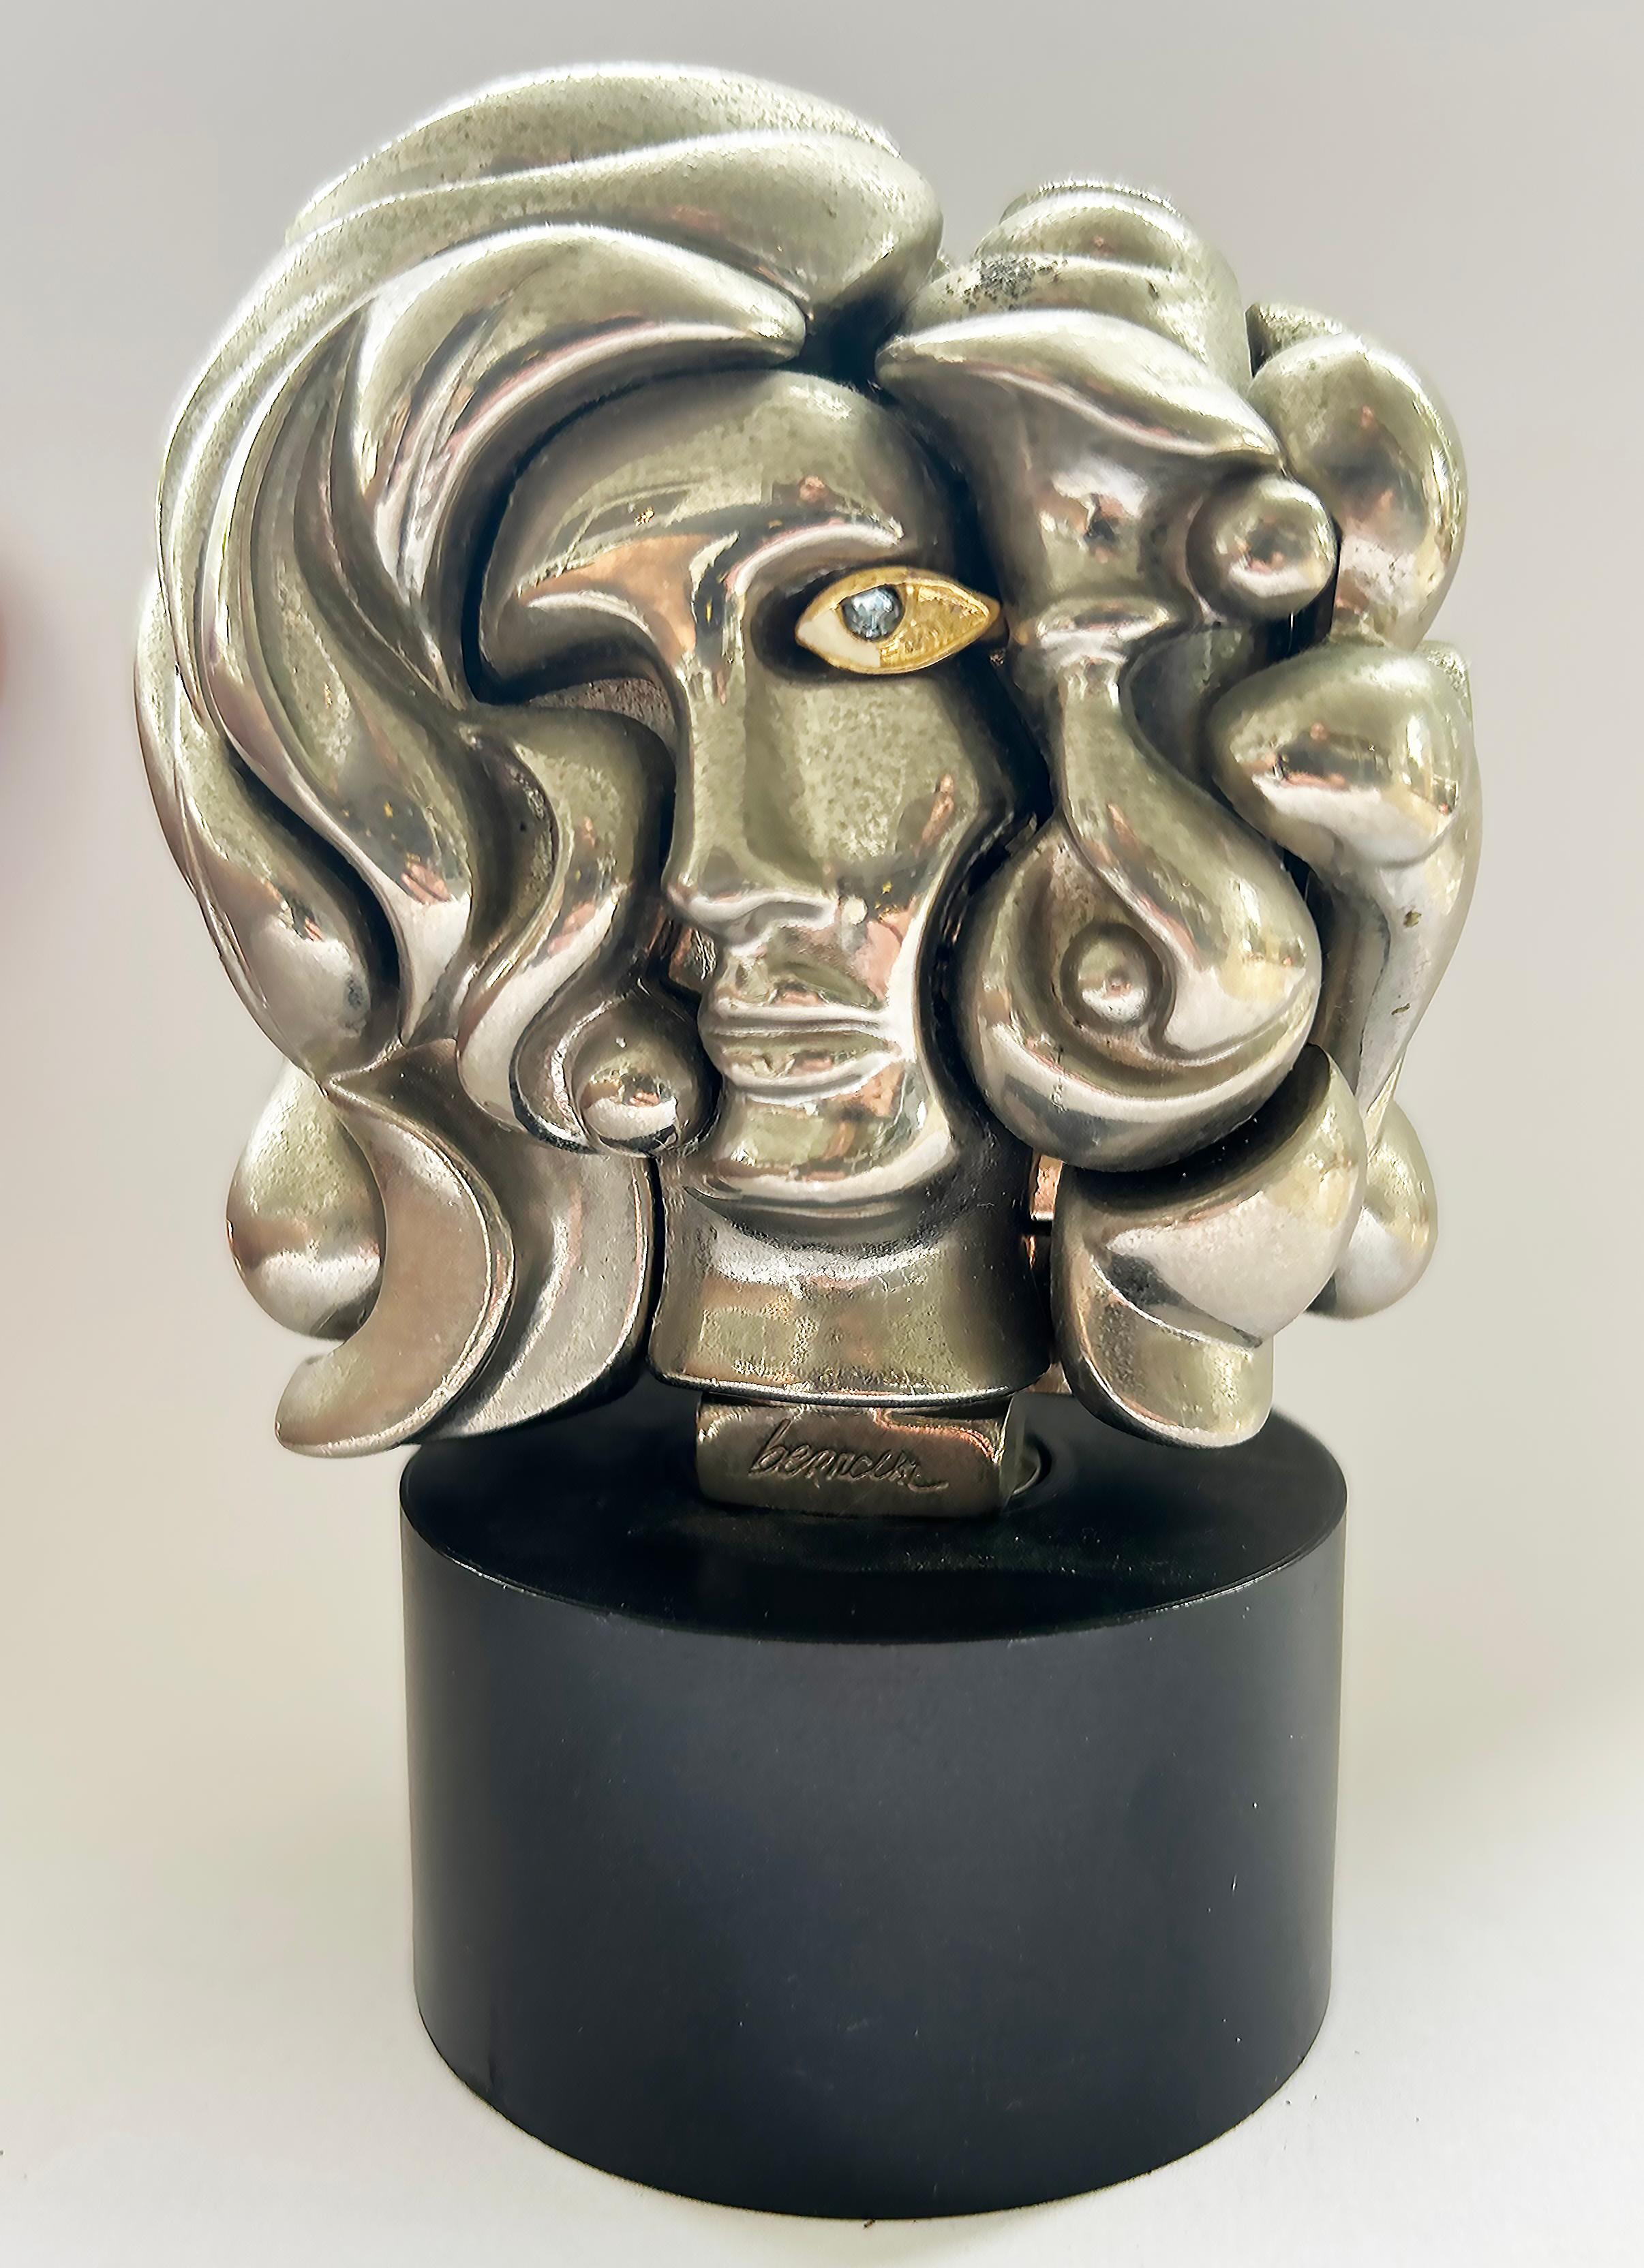 Miguel Ortiz Berrocal 1969 Portrait de Michèle Puzzle Sculpture

Offered for sale is a 1969 Miguel Ortiz Berrocal limited edition nickel-plated puzzle sculpture titled, 